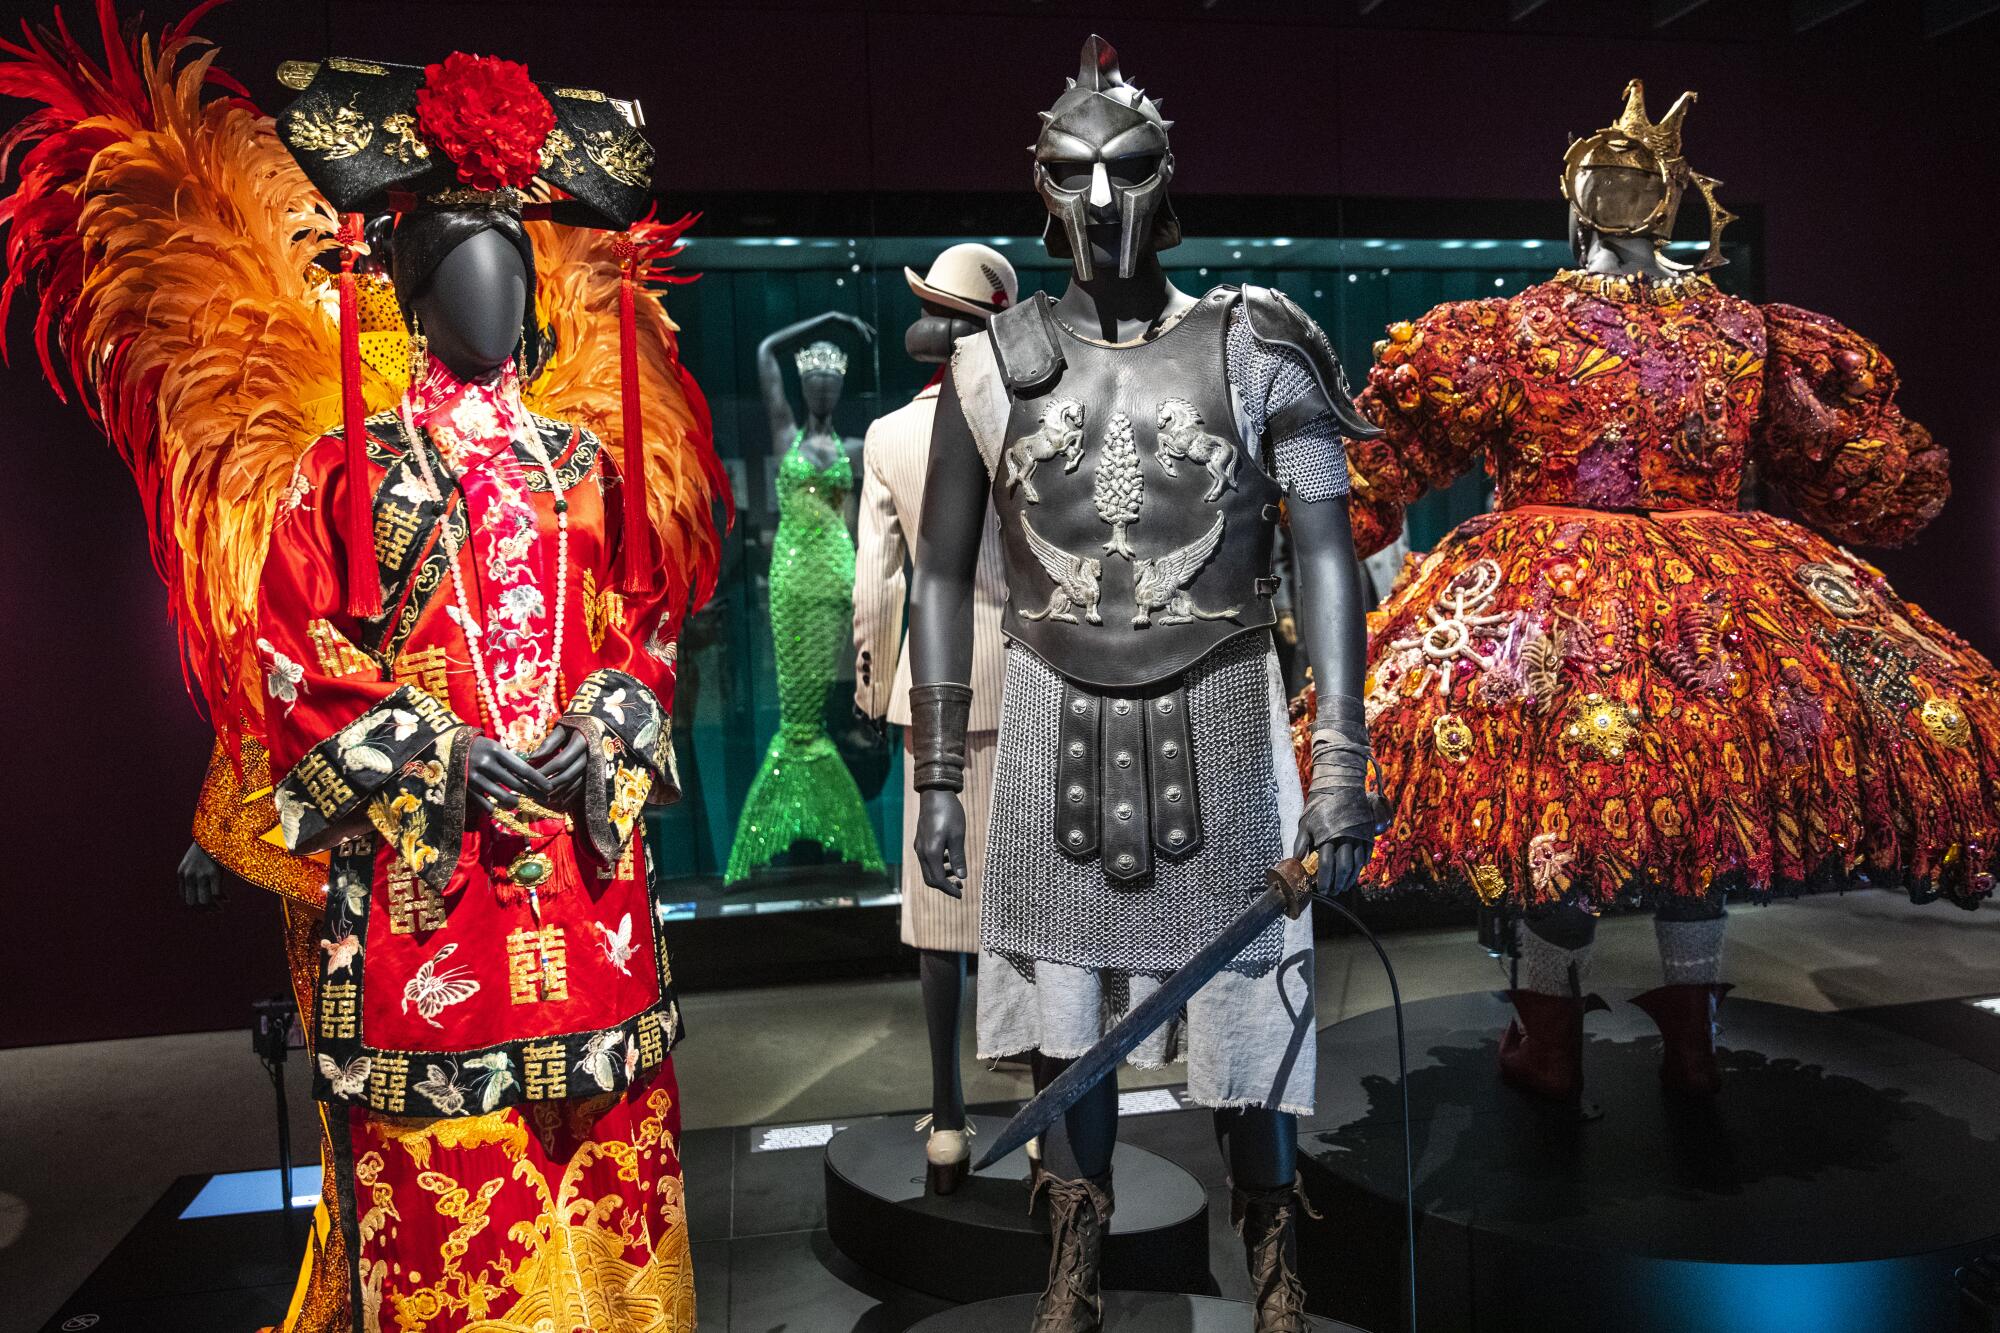 Costumes in the "Identity" gallery.  